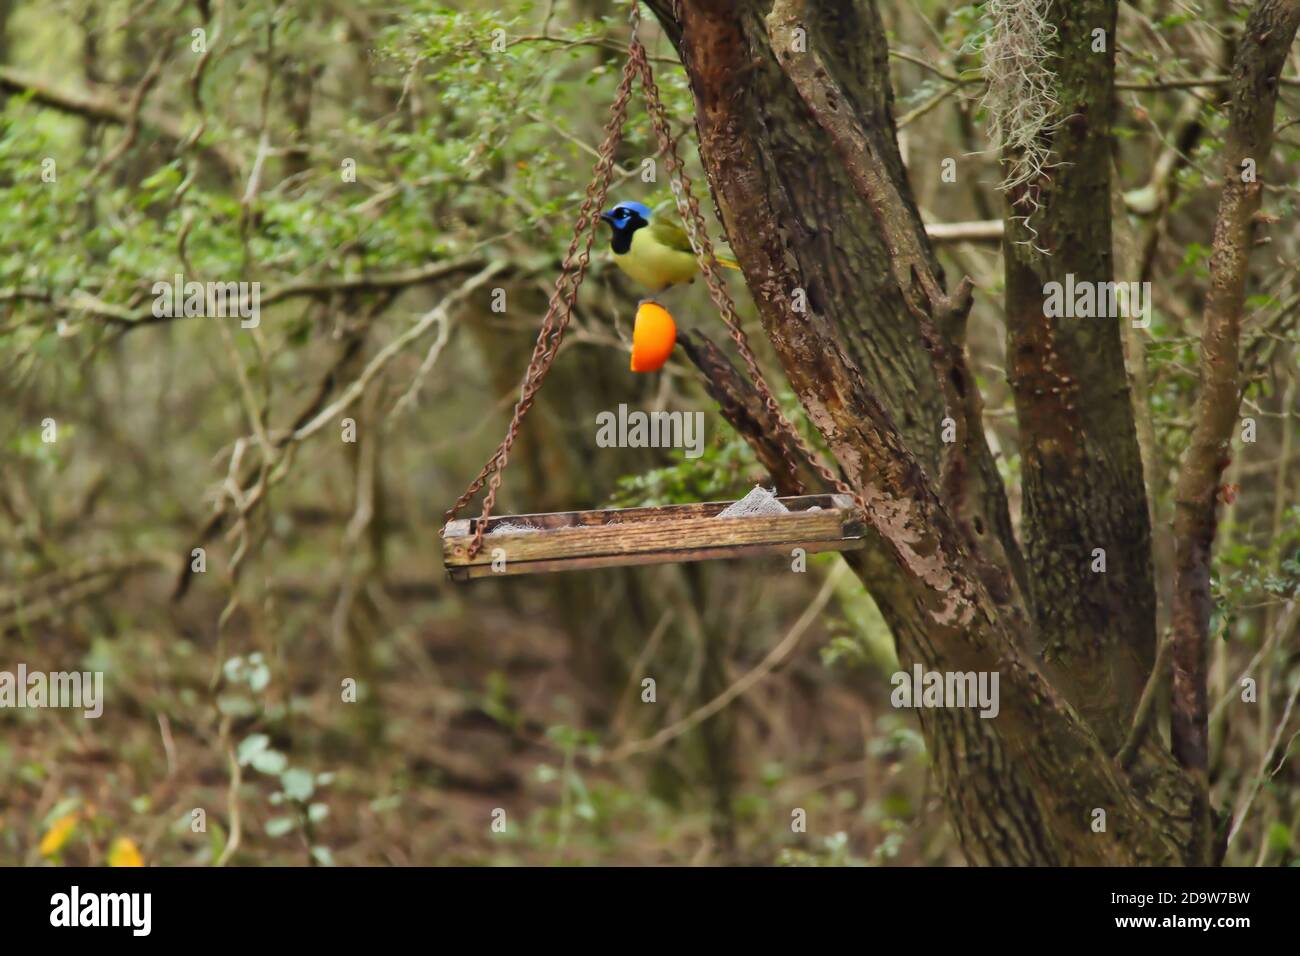 Green Jay perched on half of a orange at a feeding station in a Texas State Park near Mission, Texas, U.S.A. North America. Stock Photo